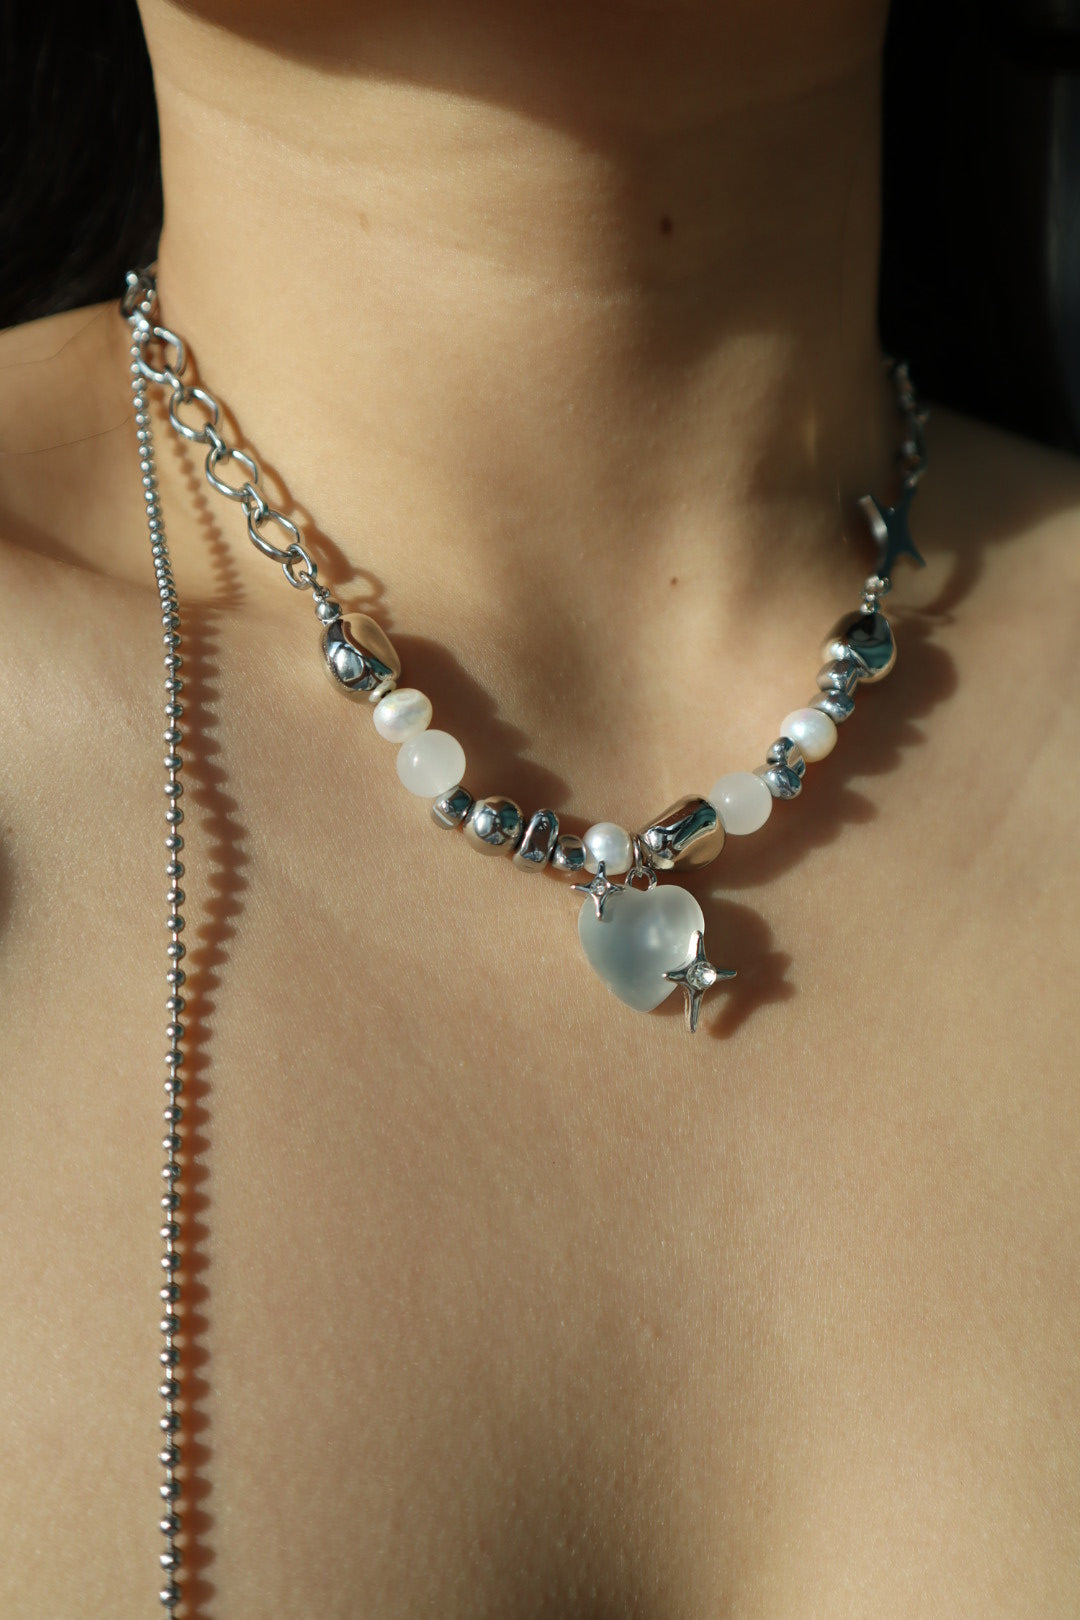 Moonlight Glowing Heart Pearls Necklace